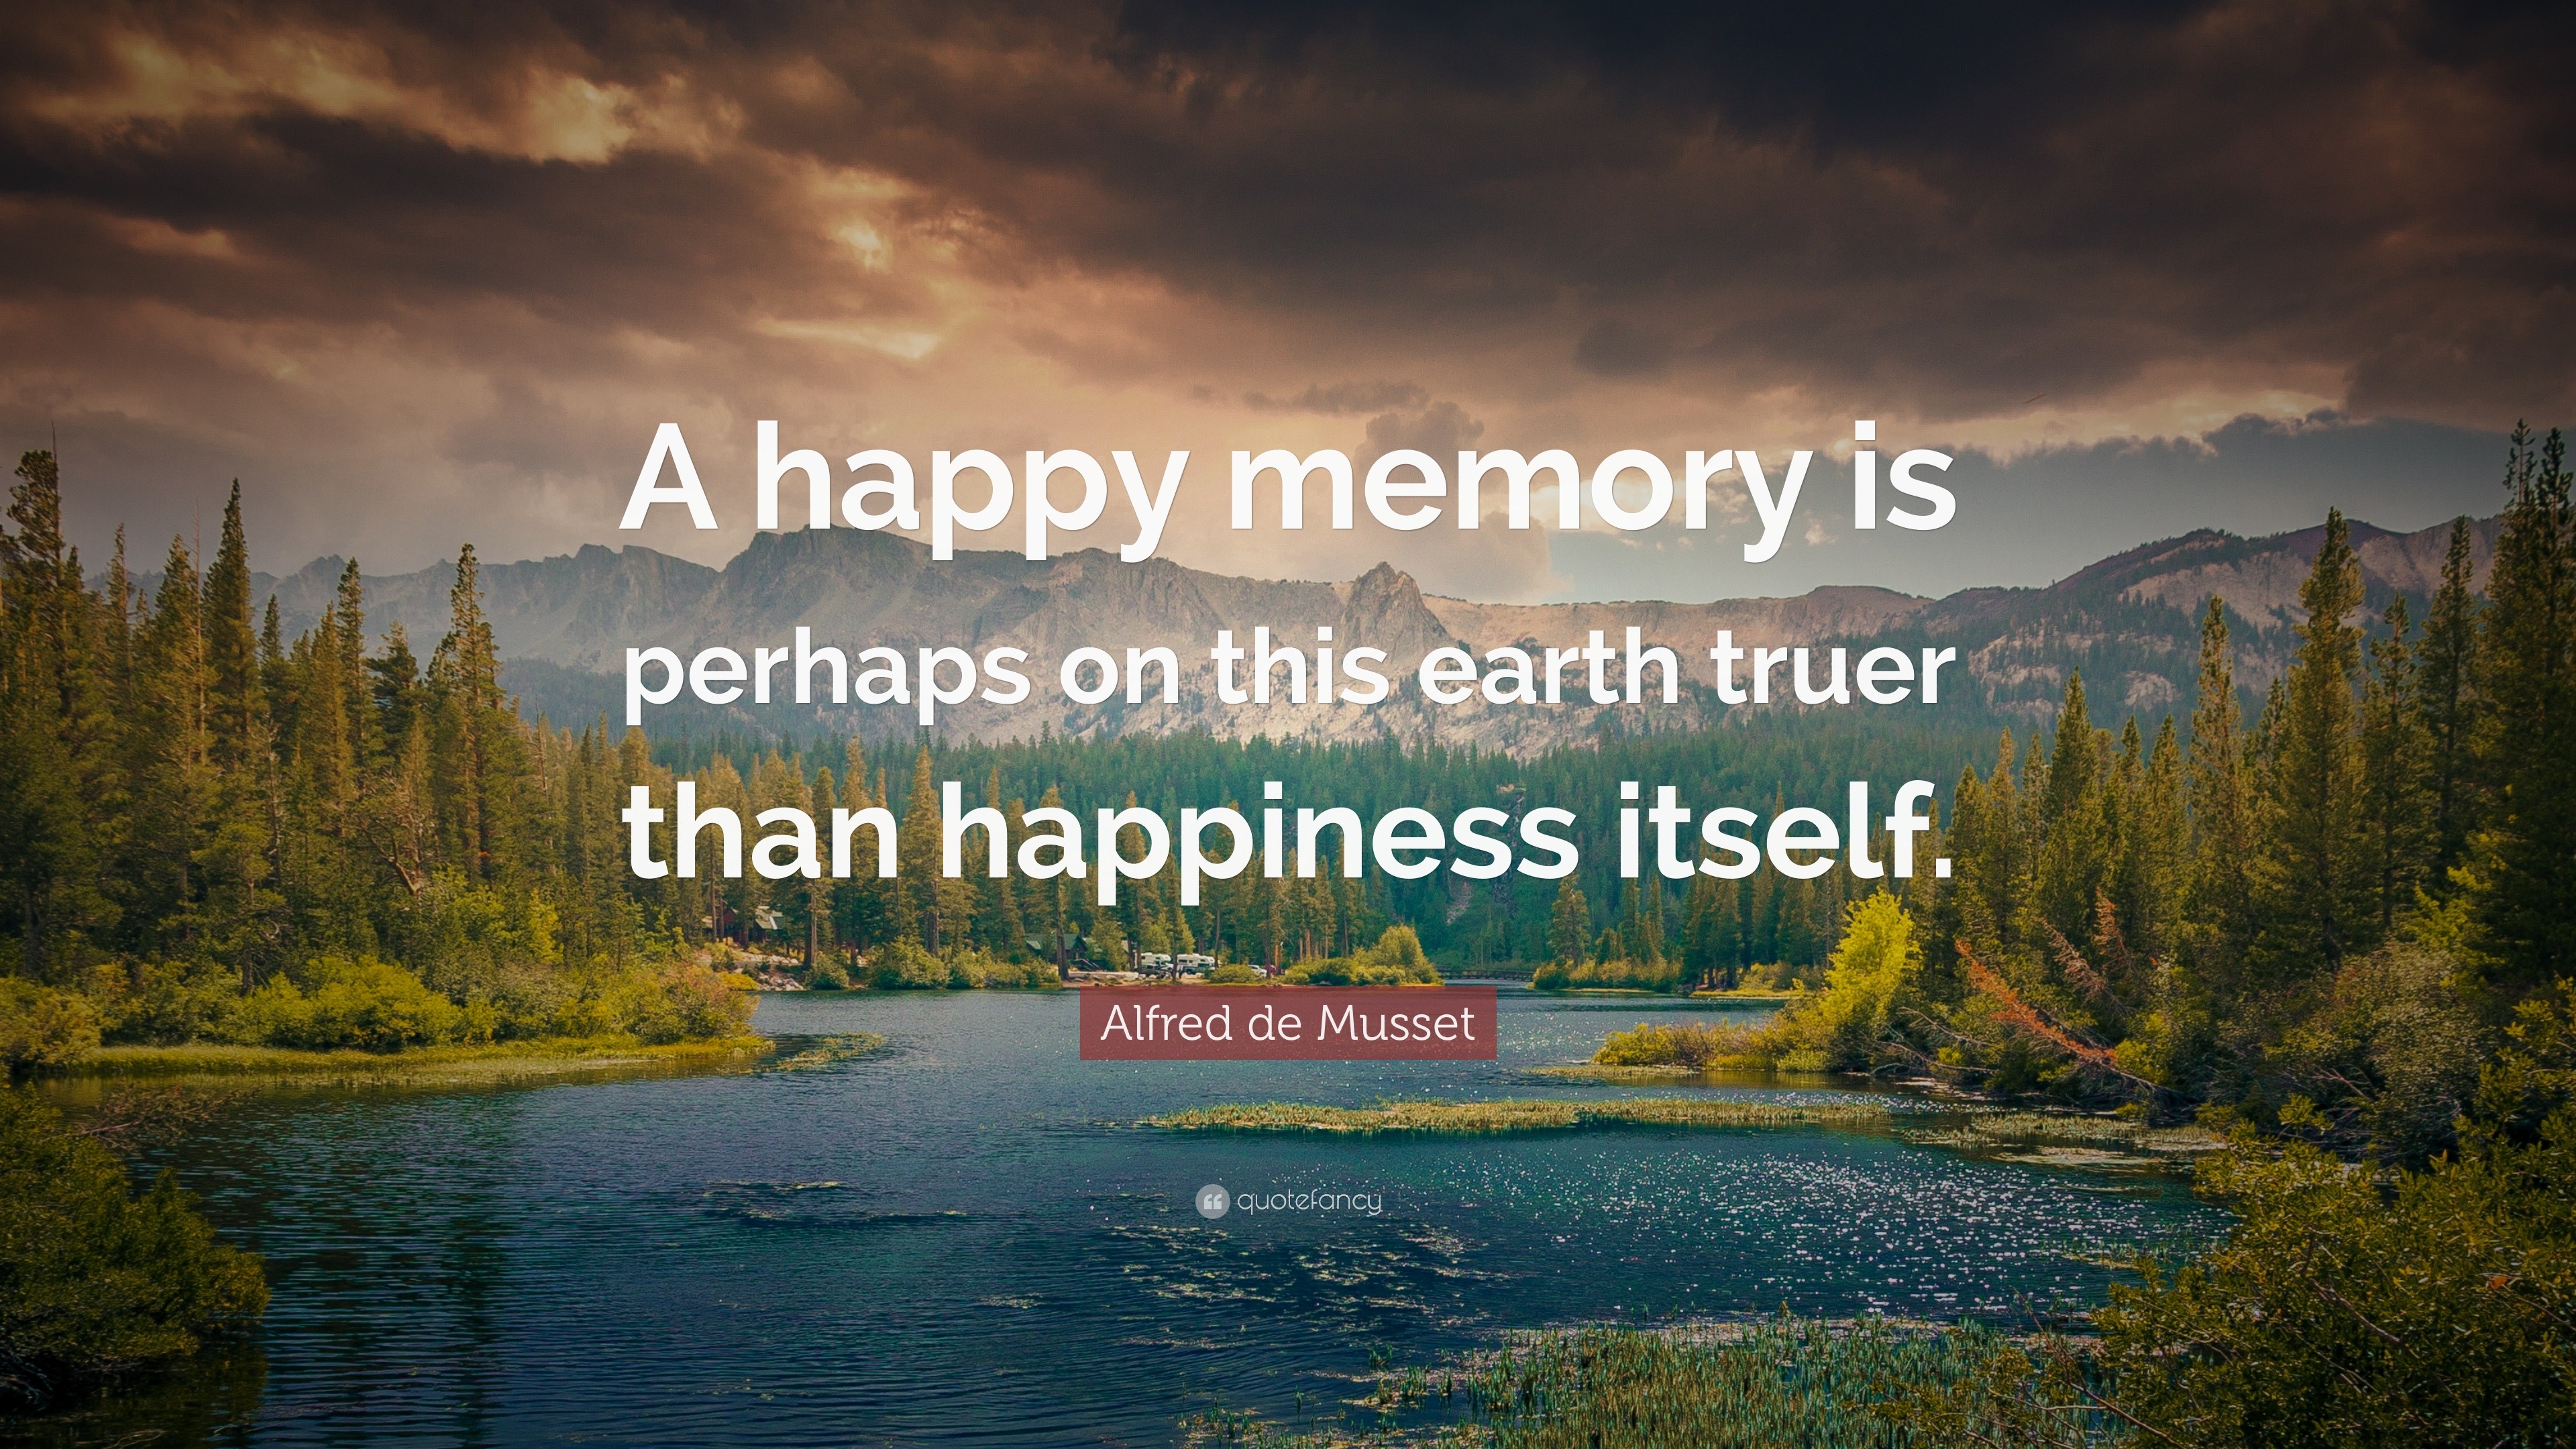 Alfred de Musset Quote: “A happy memory is perhaps on this earth truer ...